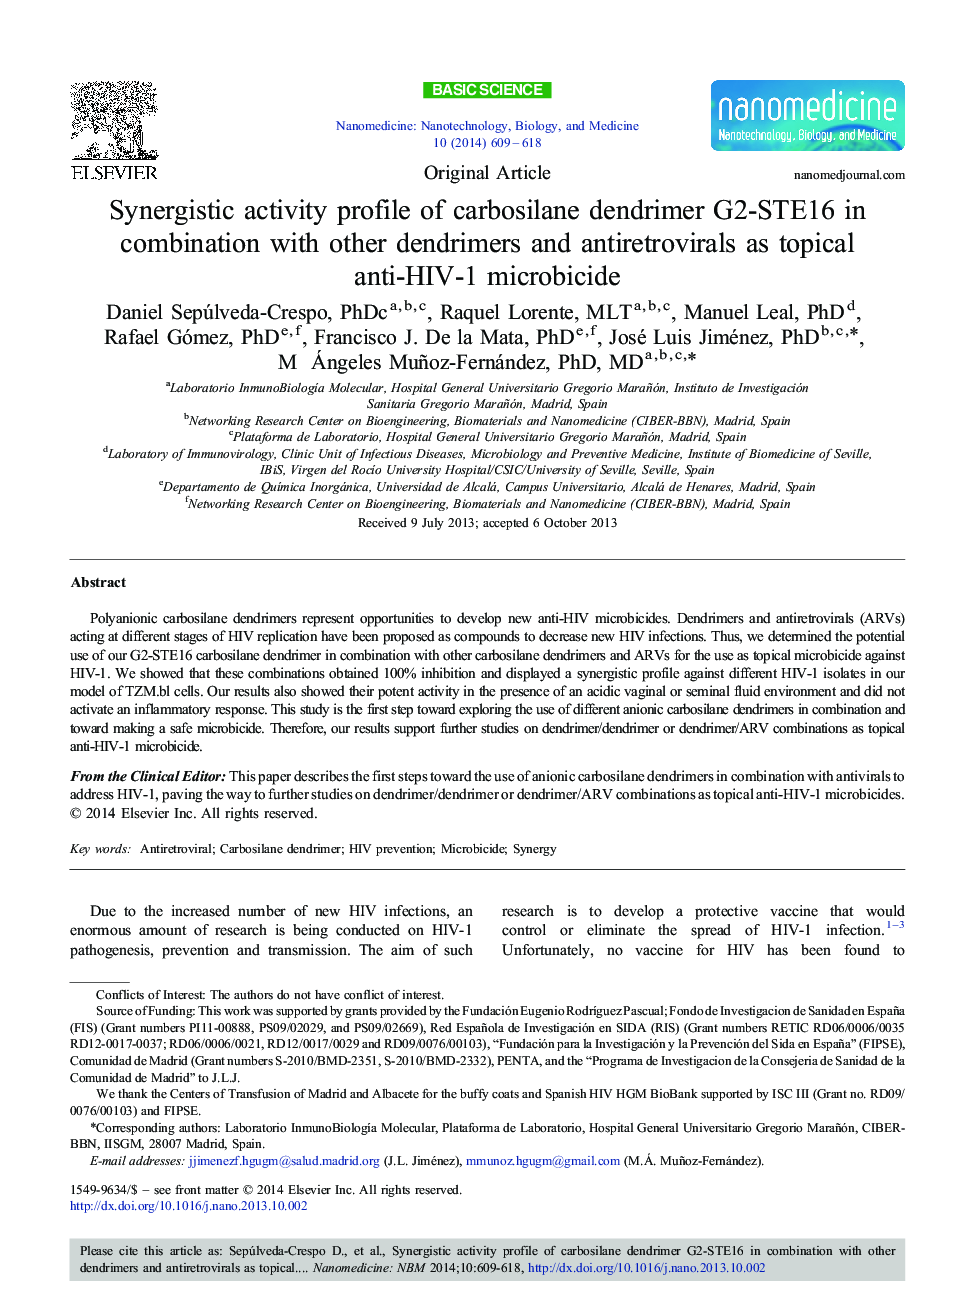 Synergistic activity profile of carbosilane dendrimer G2-STE16 in combination with other dendrimers and antiretrovirals as topical anti-HIV-1 microbicide 